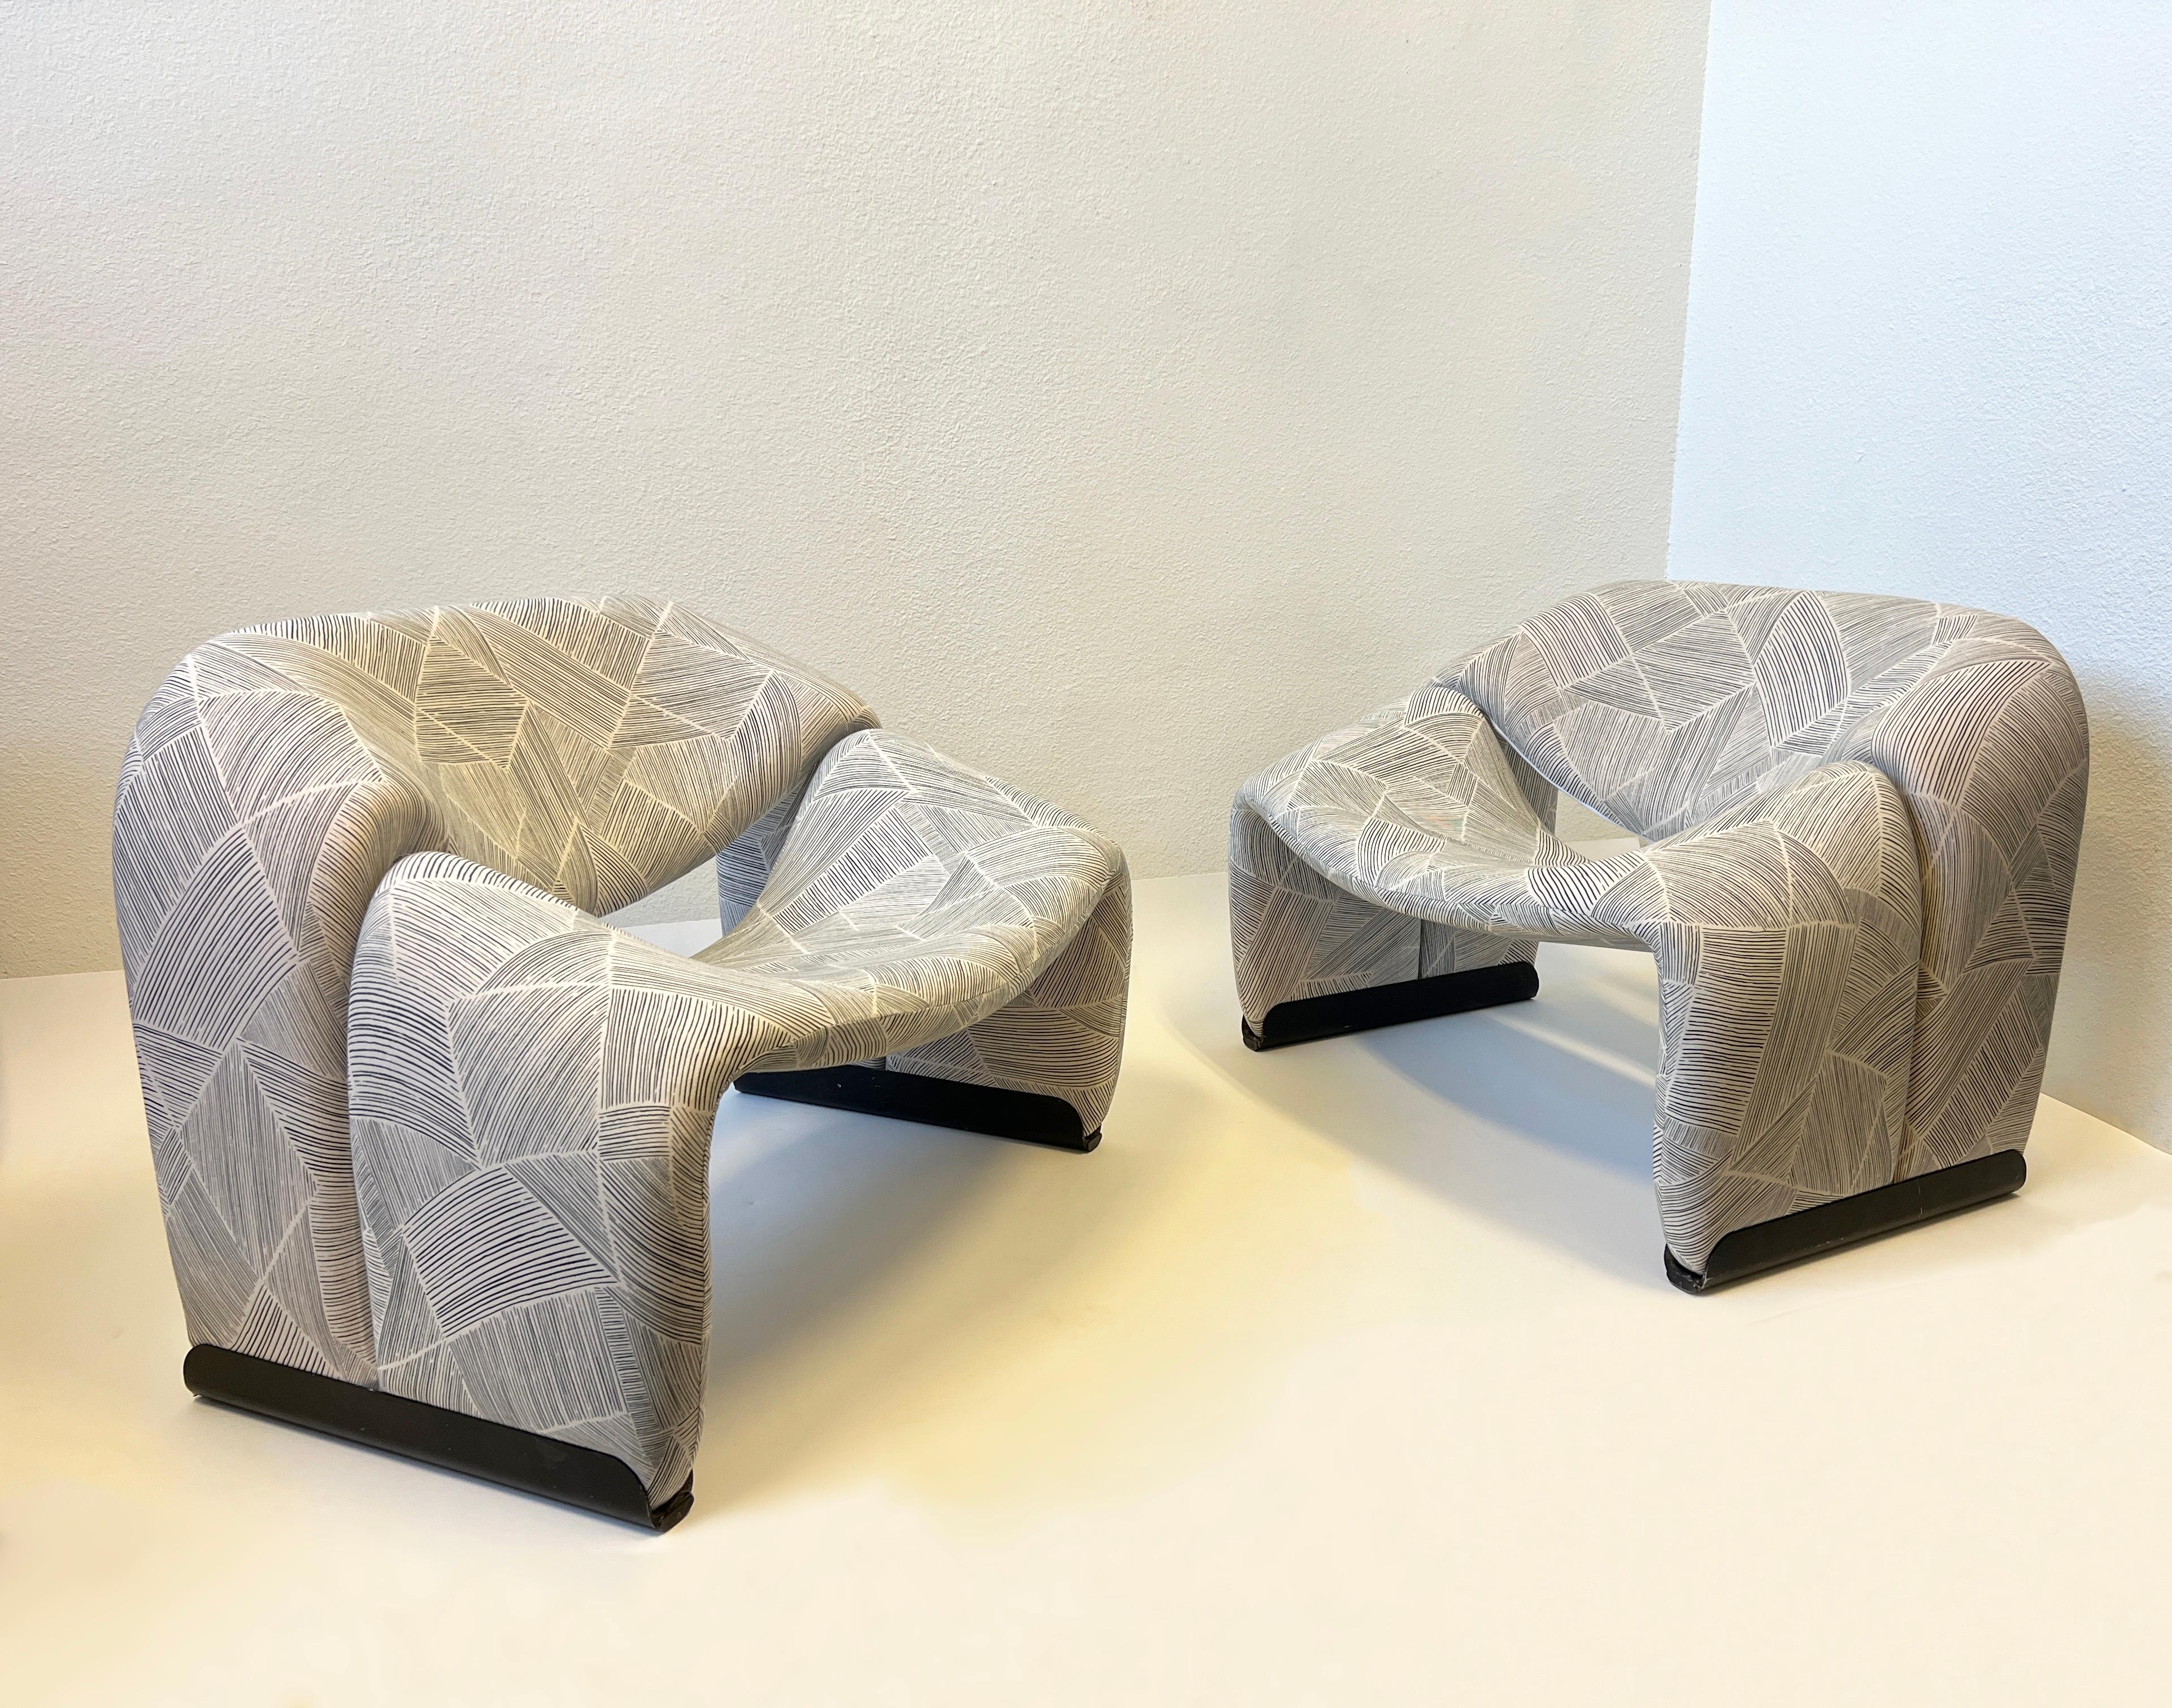 Pair of ‘Groovy’ lounge chairs designed in 1972 by Pierre Paulin.
Pair of Poufs by Vladimir Kagan are available in a separate listing. 
Newly upholstered in a soft stretch jersey. 
Measurements: 33” Wide, 25.5” Deep, 24.5” High, 14” Seat. 